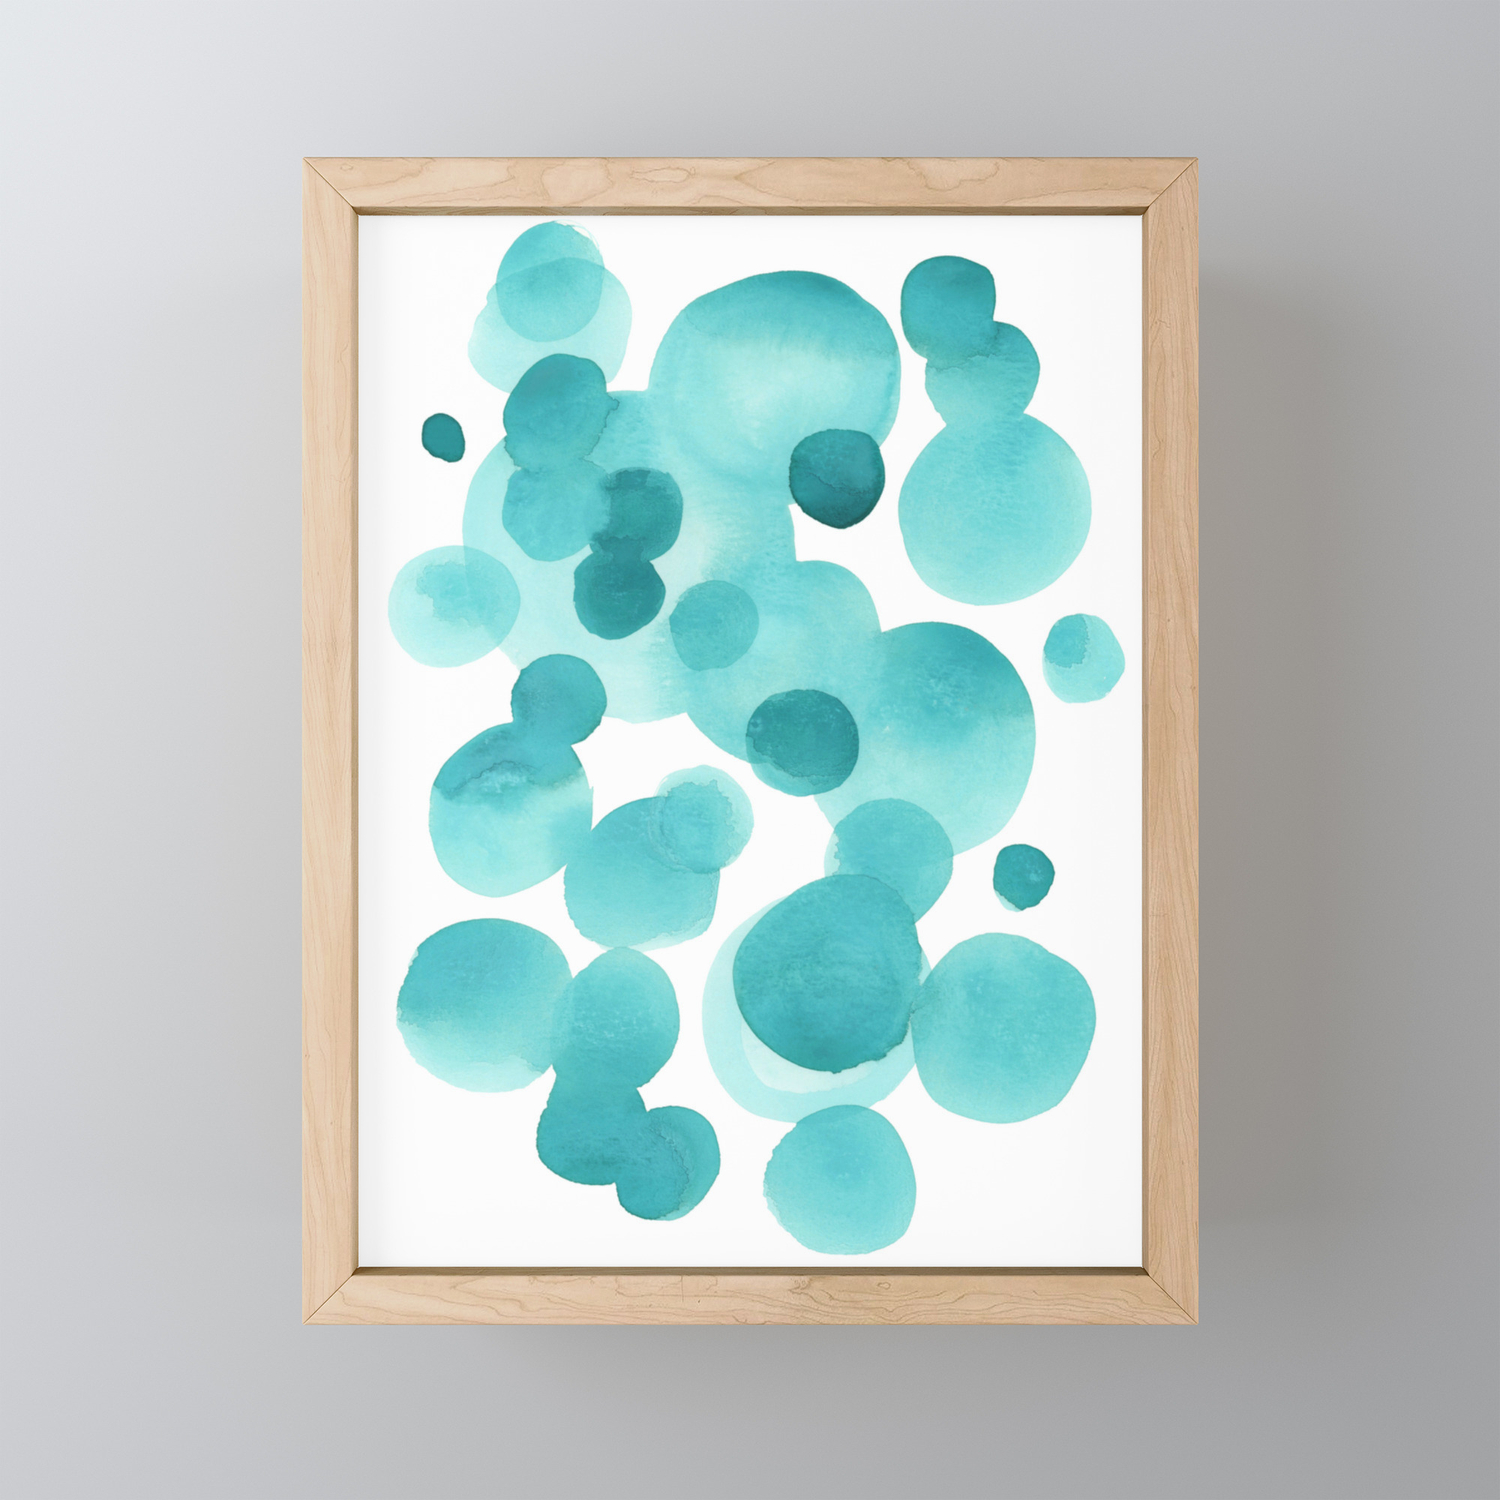 Aqua Bubbles: Abstract Turquoise Watercolor Painting Framed Mini Art Print By Pemberley Jones | Society6